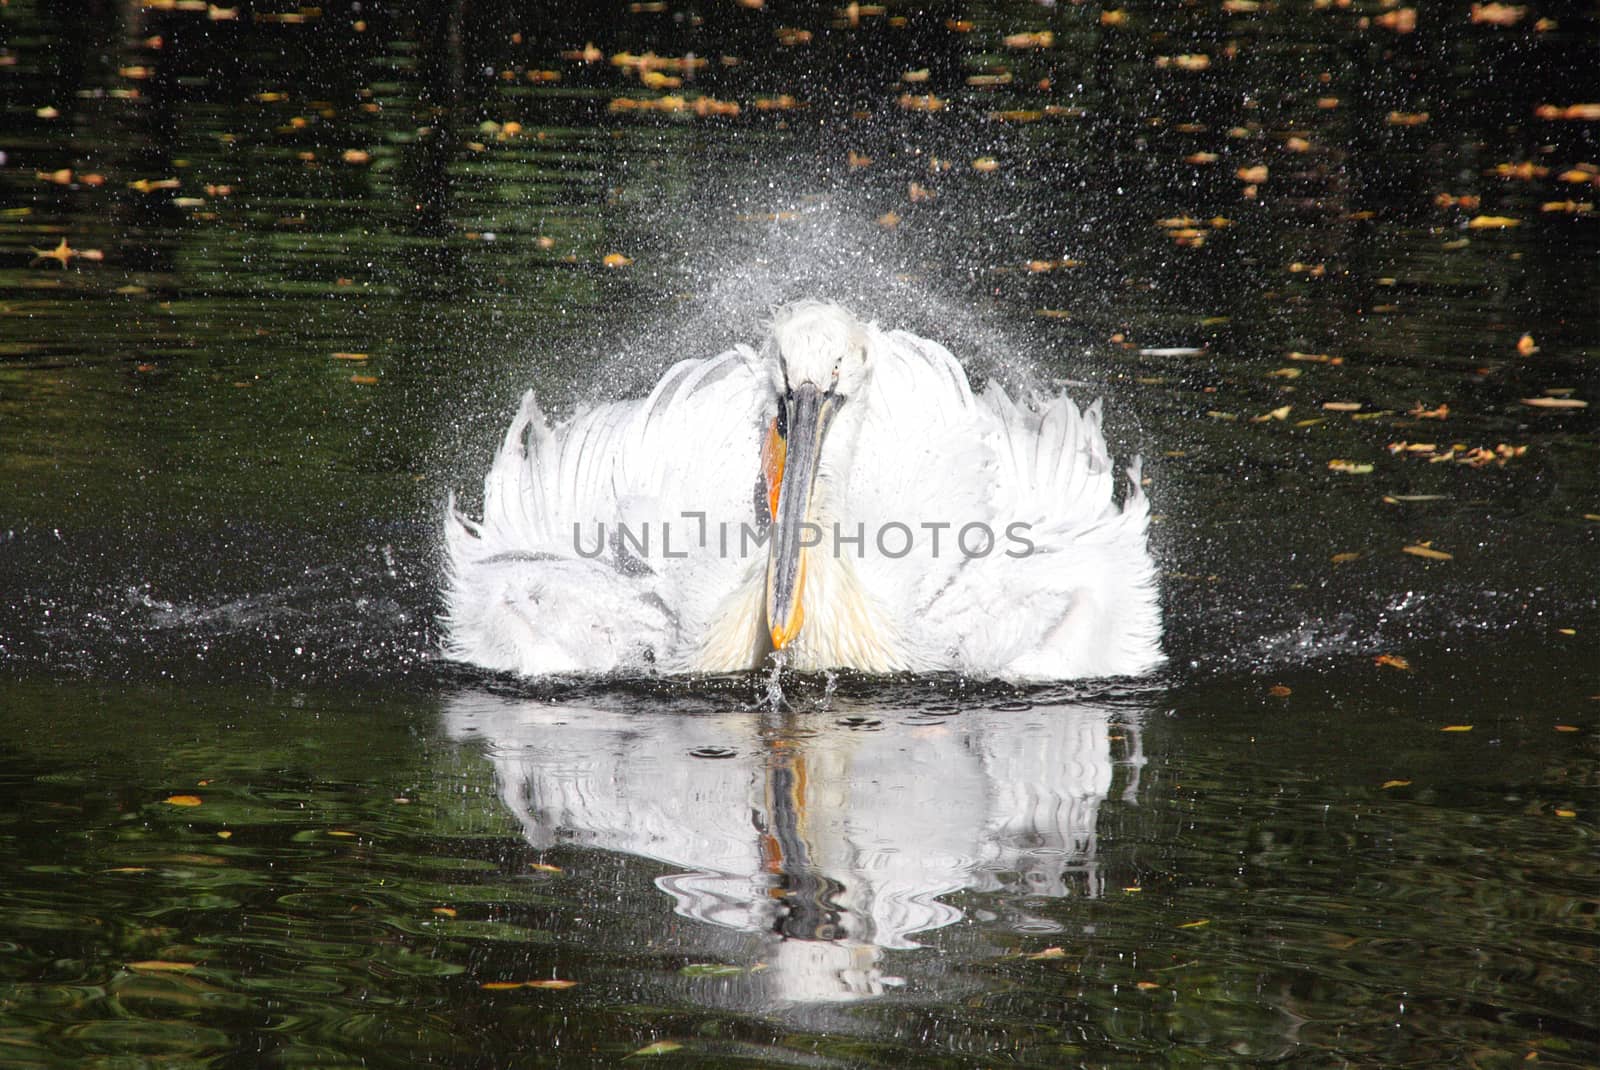 Shaking pelican sprays water droplets in the lake by rainfallsup